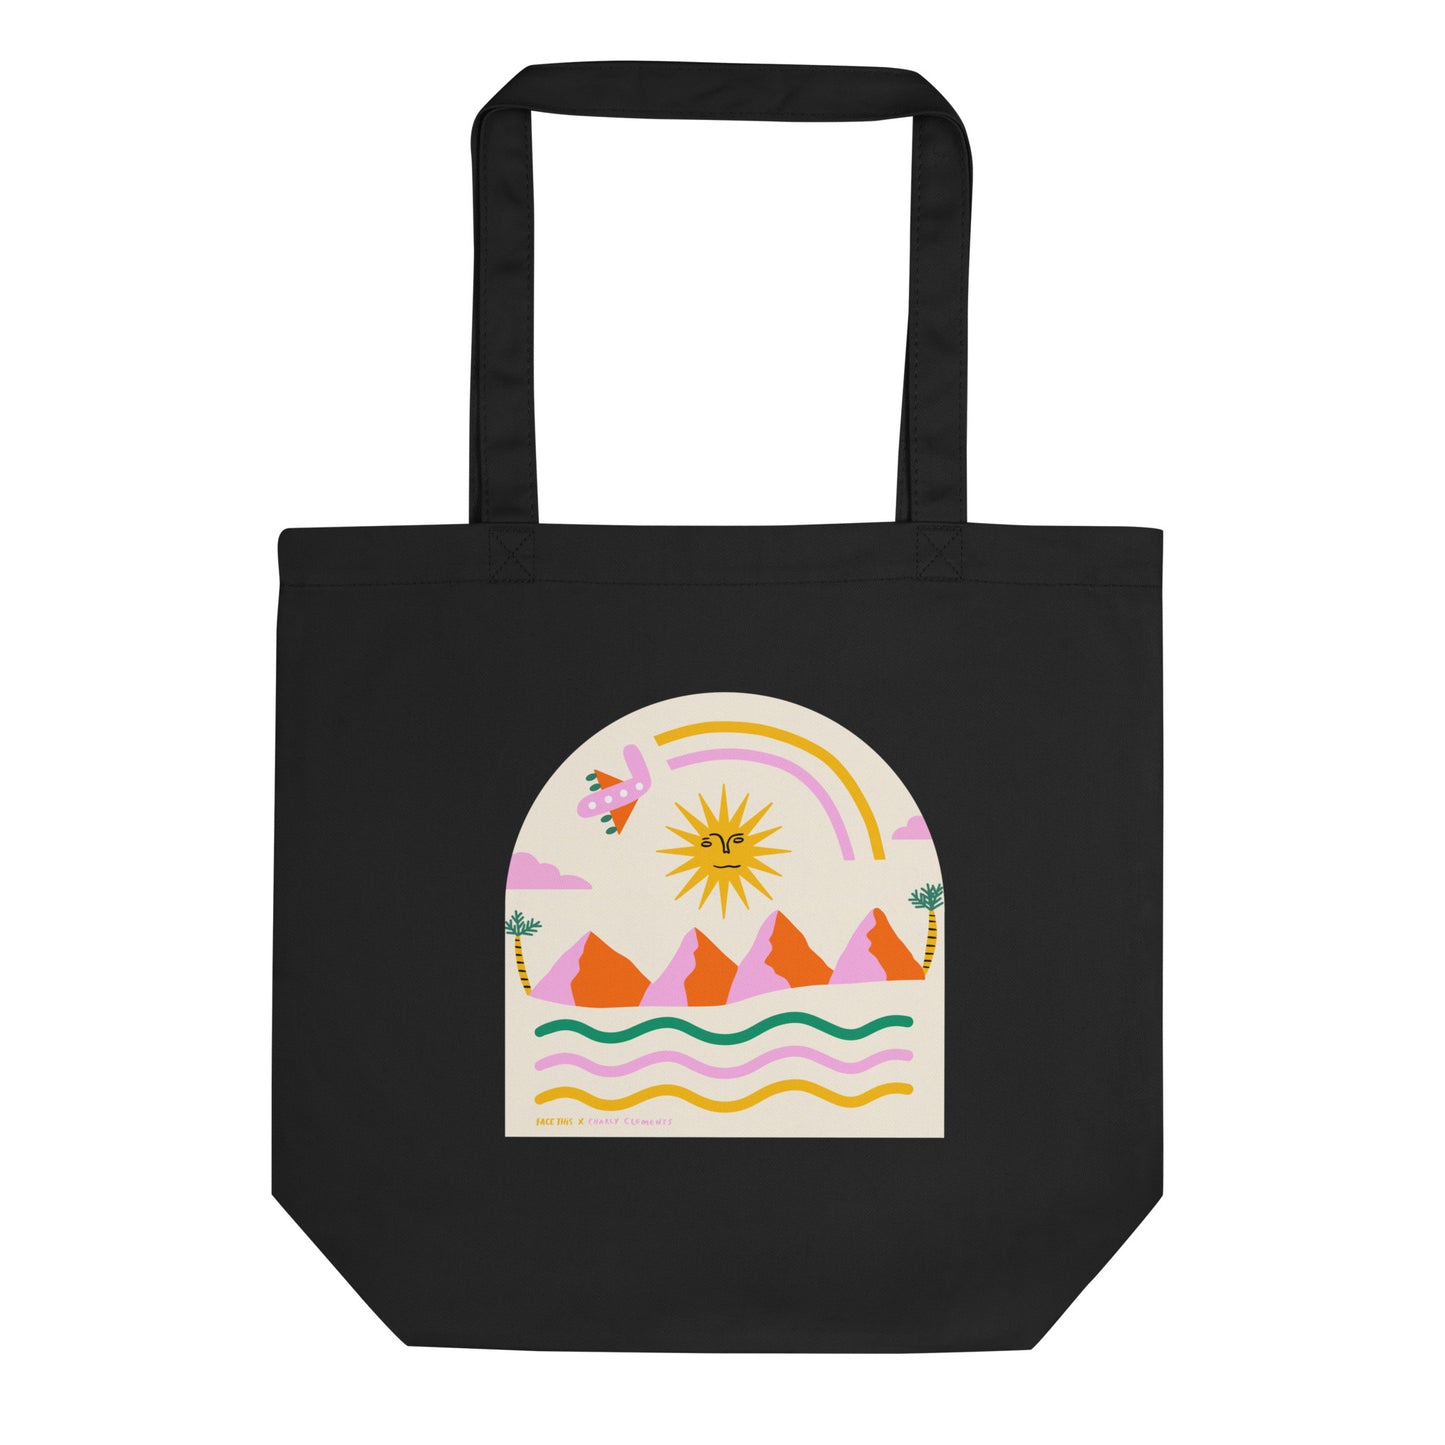 Charly Clements x Face This Eco Tote Bag